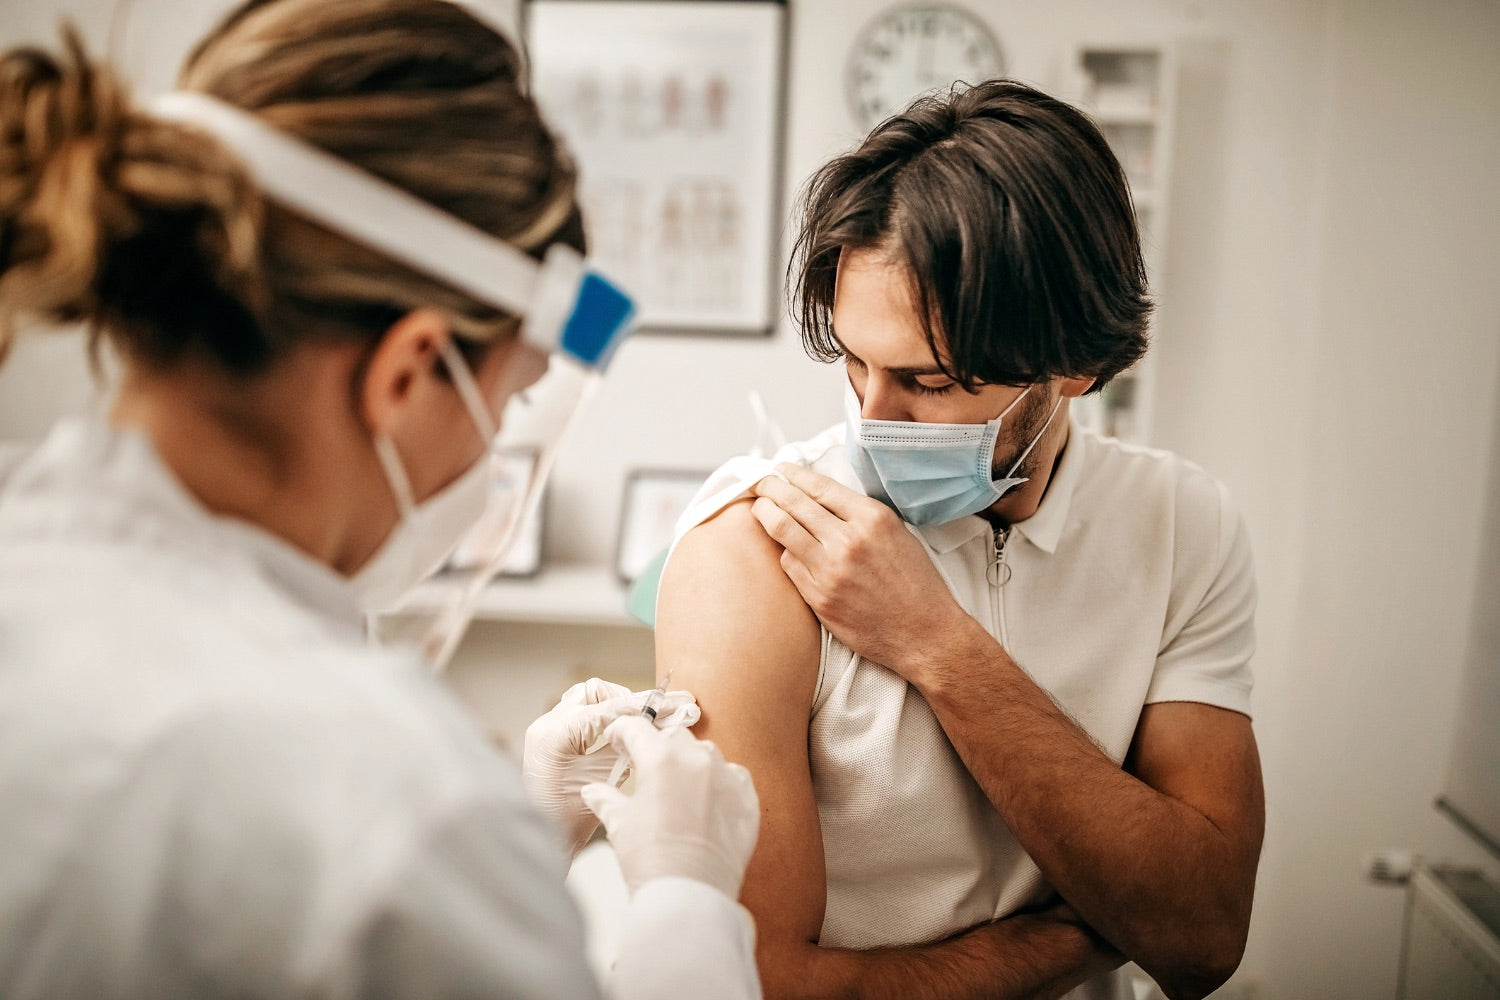 How to prepare for the COVID-19 vaccine